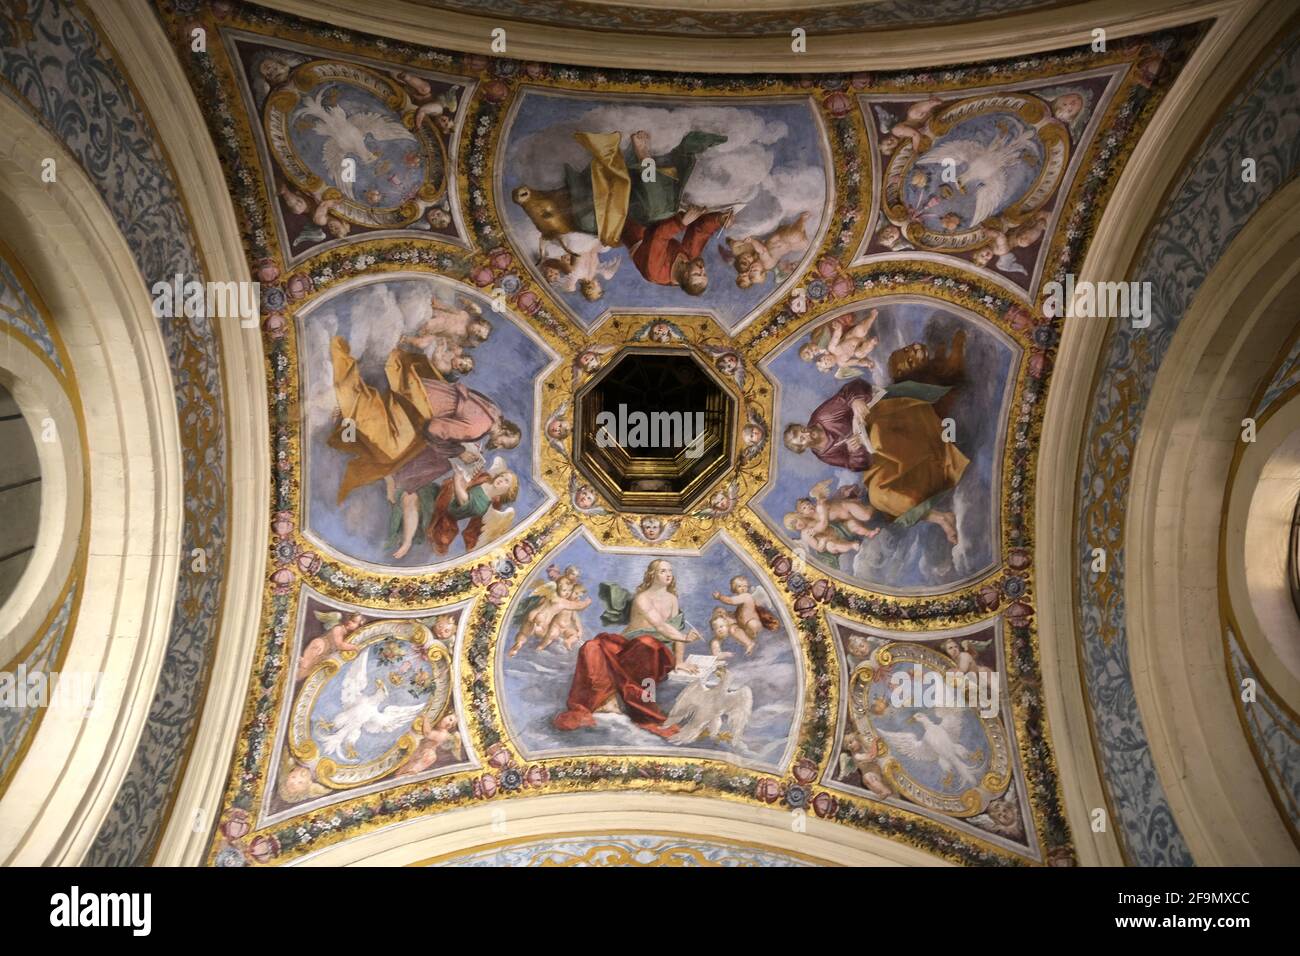 Frescoes on the ceiling of the Ducal Chapel in the Castle Estense in Ferrara Italy Stock Photo